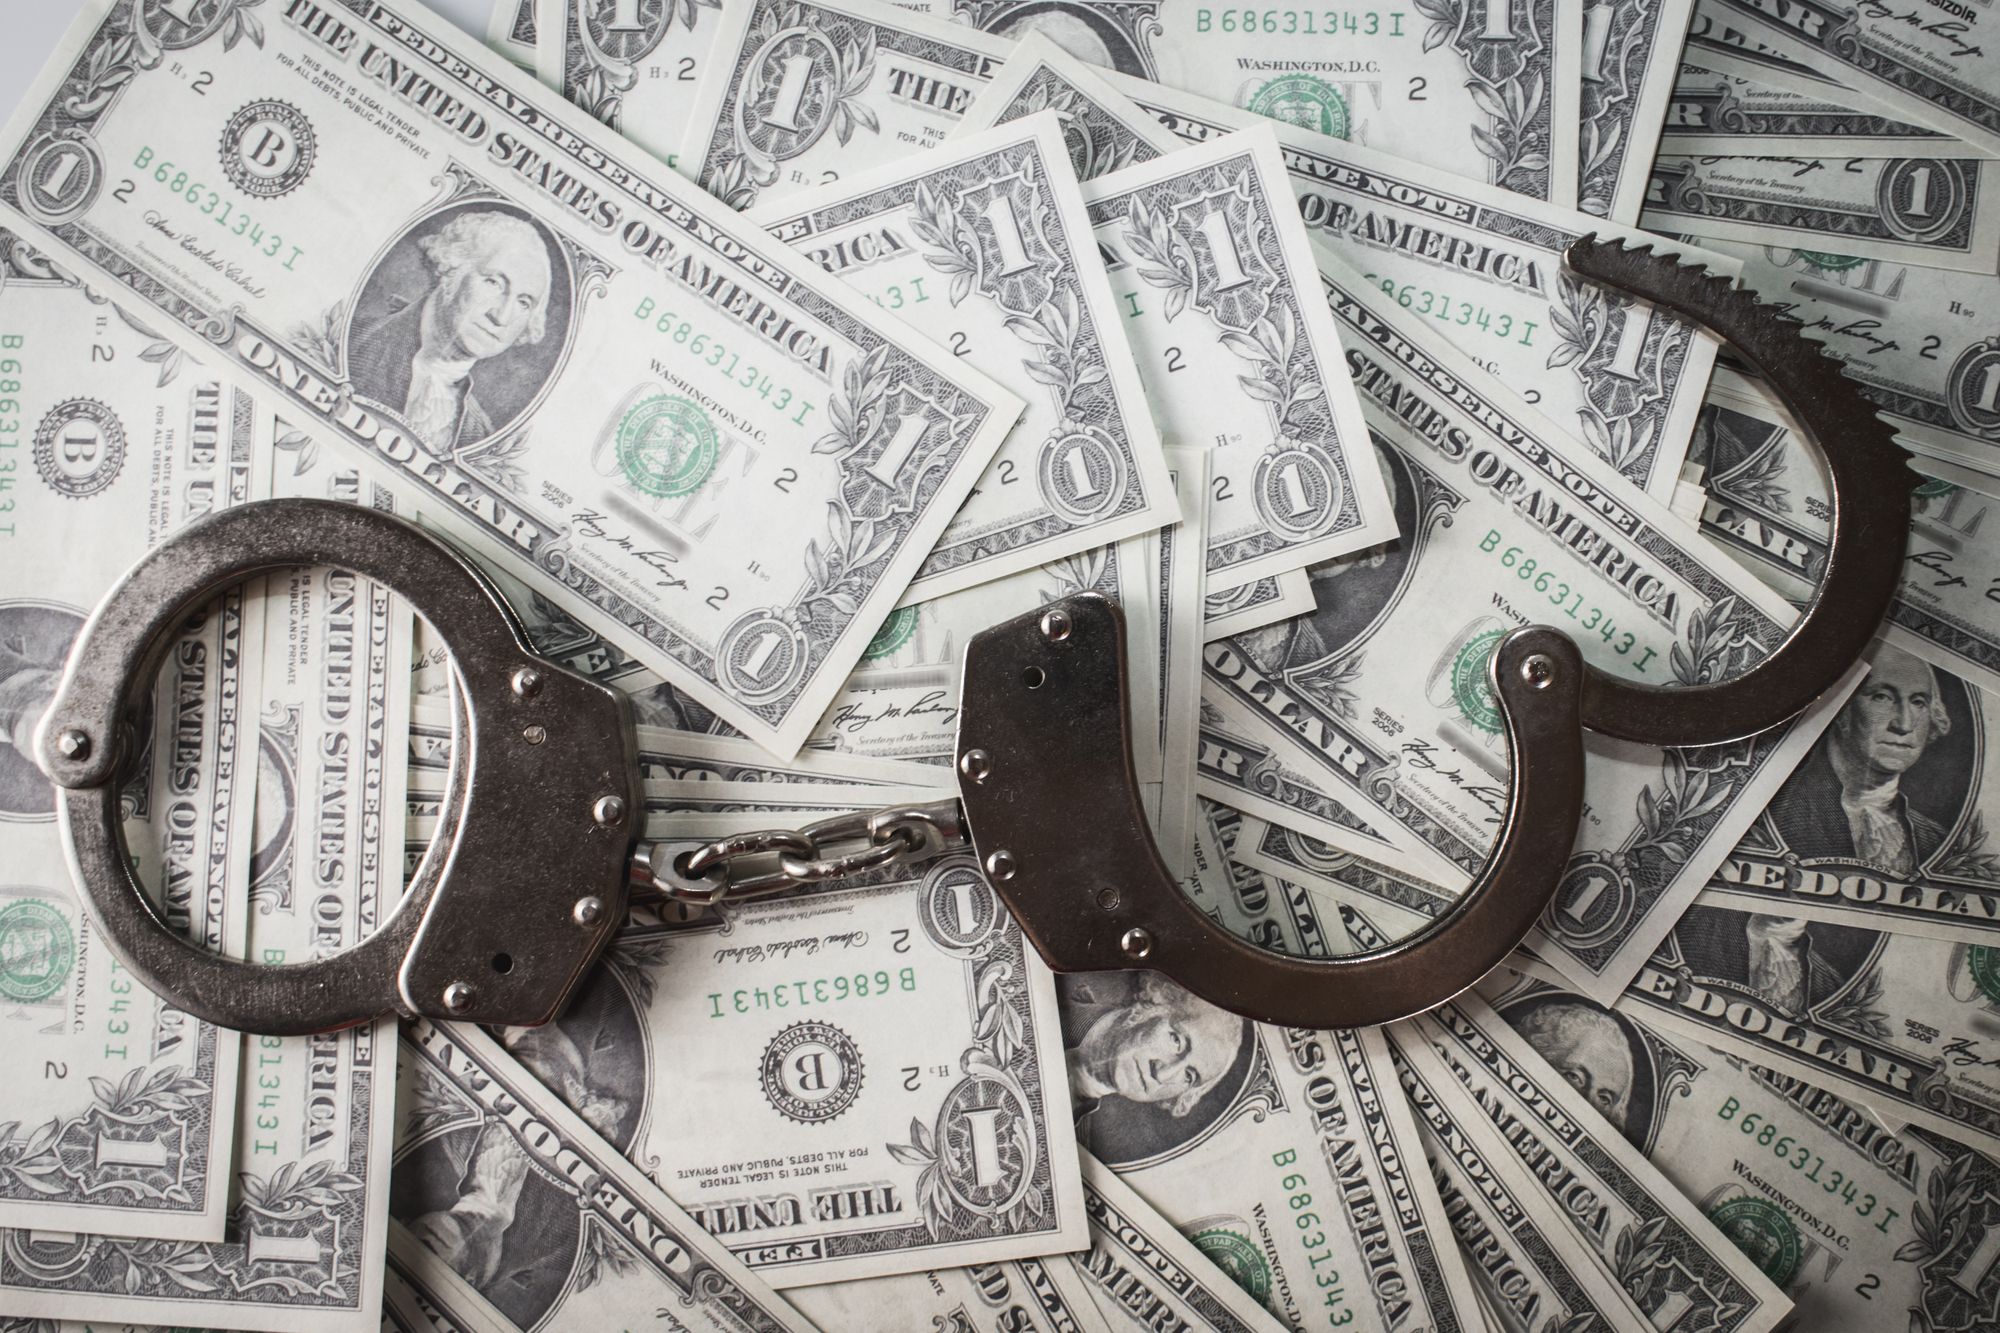 EmpiresX CEO Faces 4 Years in Prison Over $100M Crypto Ponzi